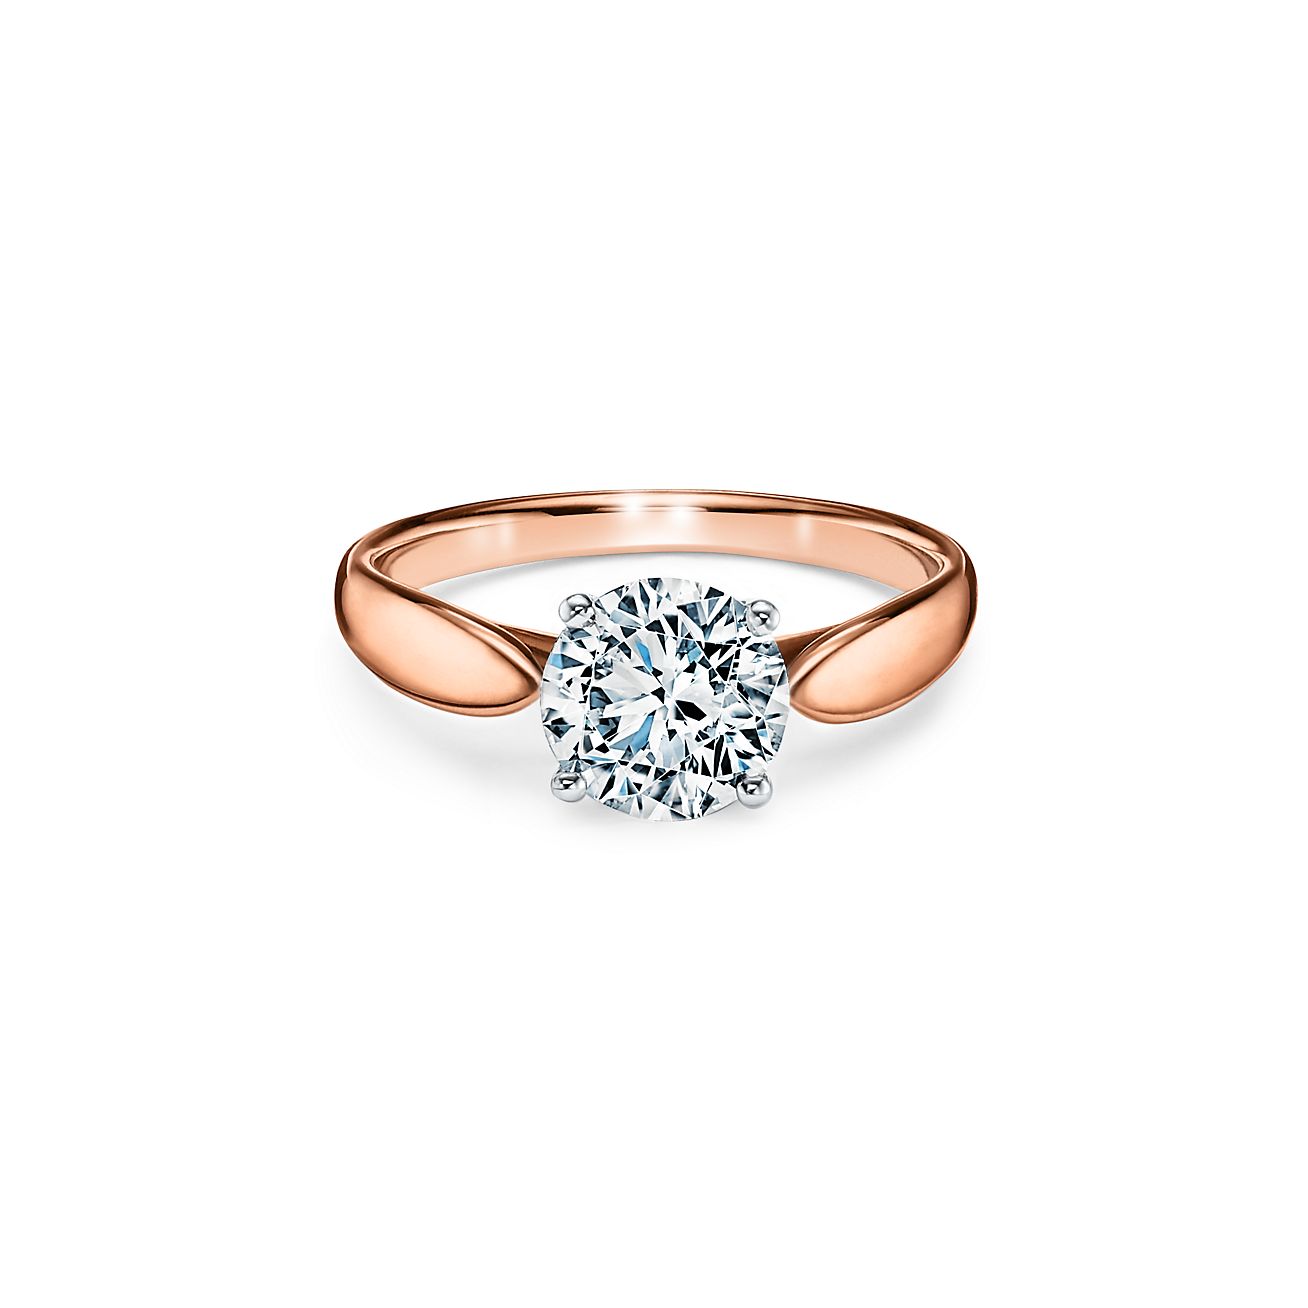 Tiffany Harmony® engagement ring in 18k rose gold: a study in balance and grace. | Tiffany & Co.